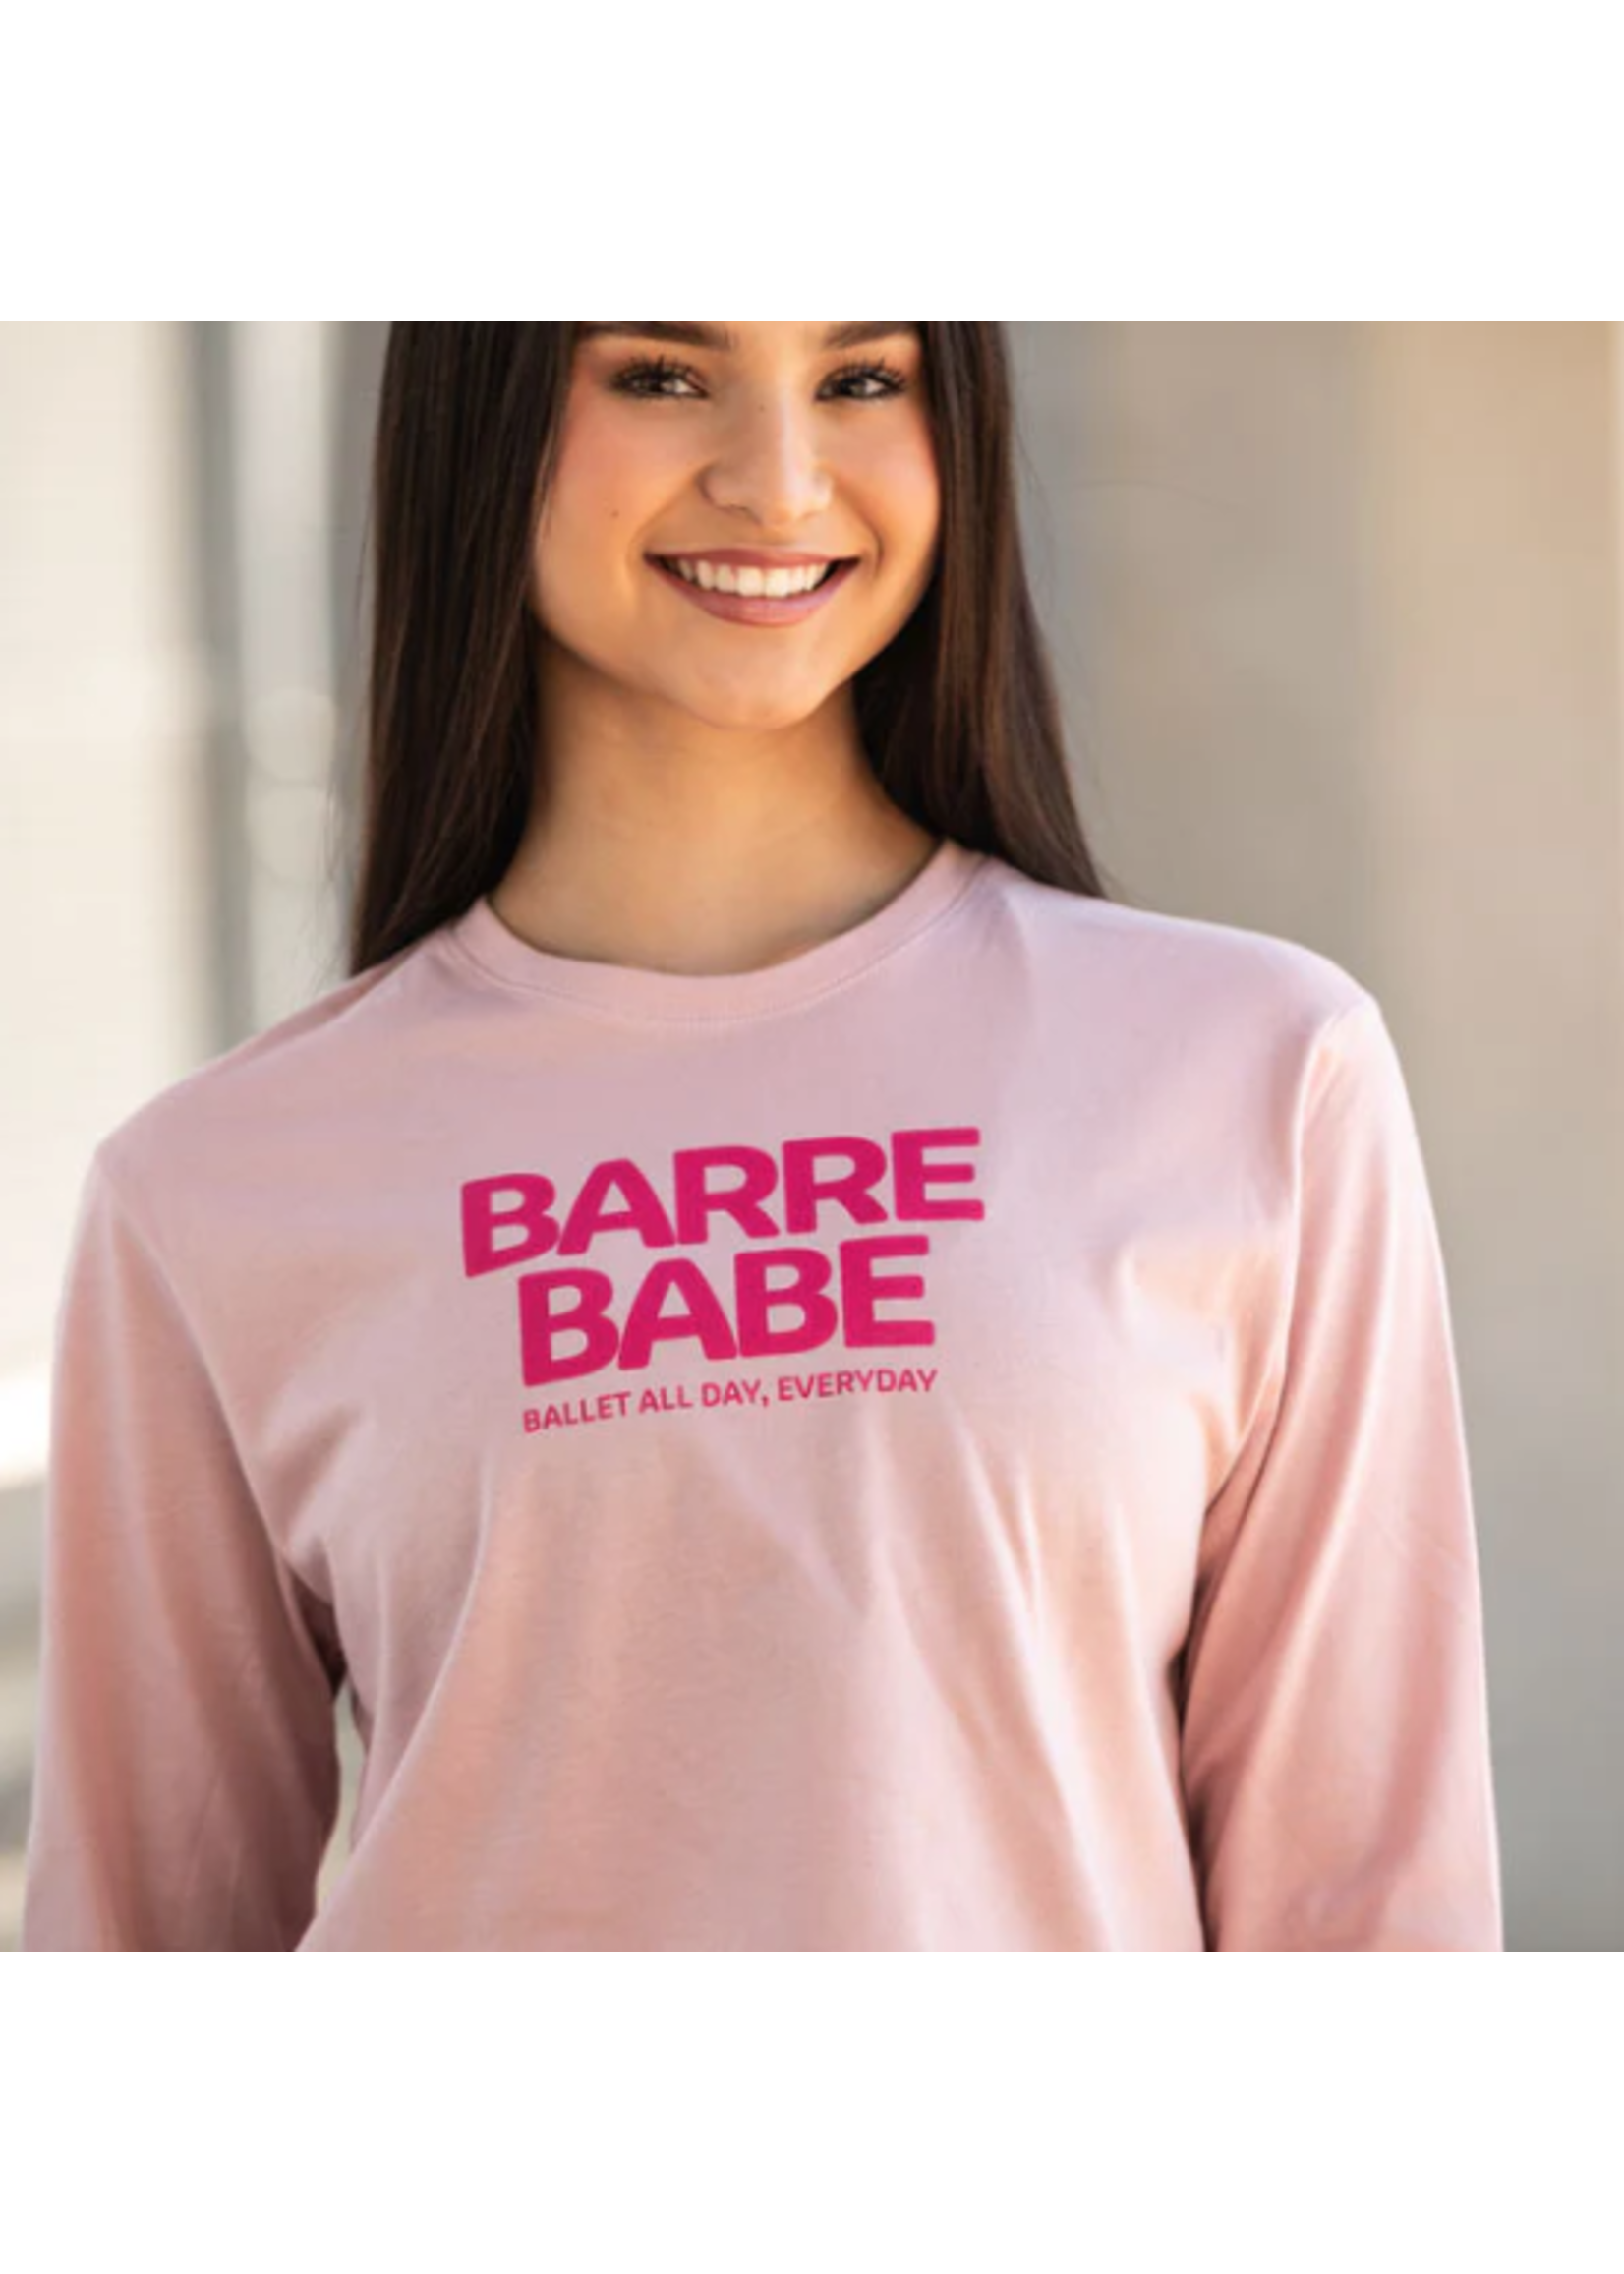 COVET DANCE BARRE BABE L/S CROPPED TSHIRT